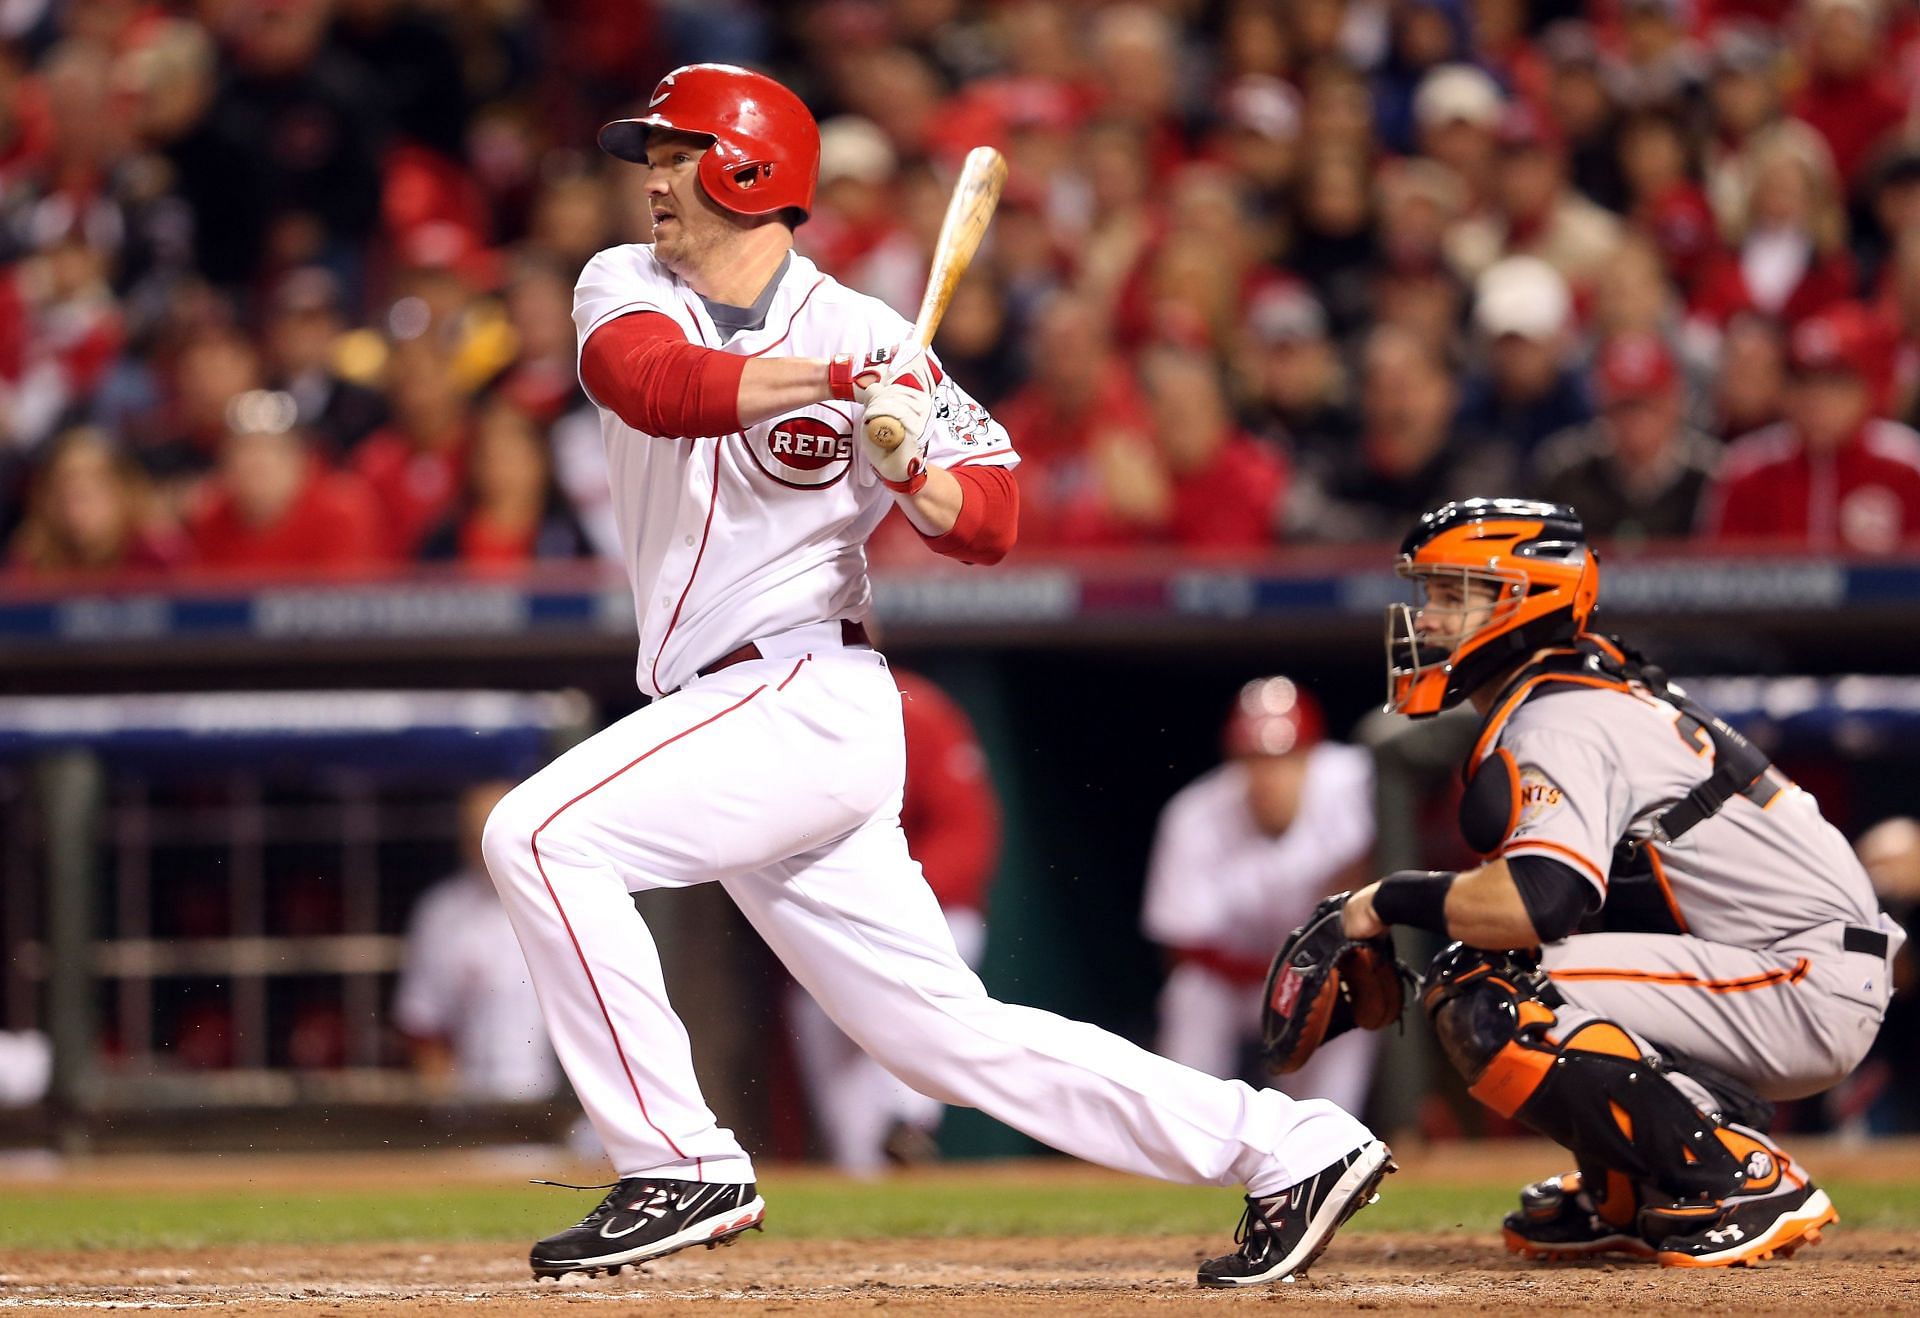 Examining the hall of fame case for Scott Rolen